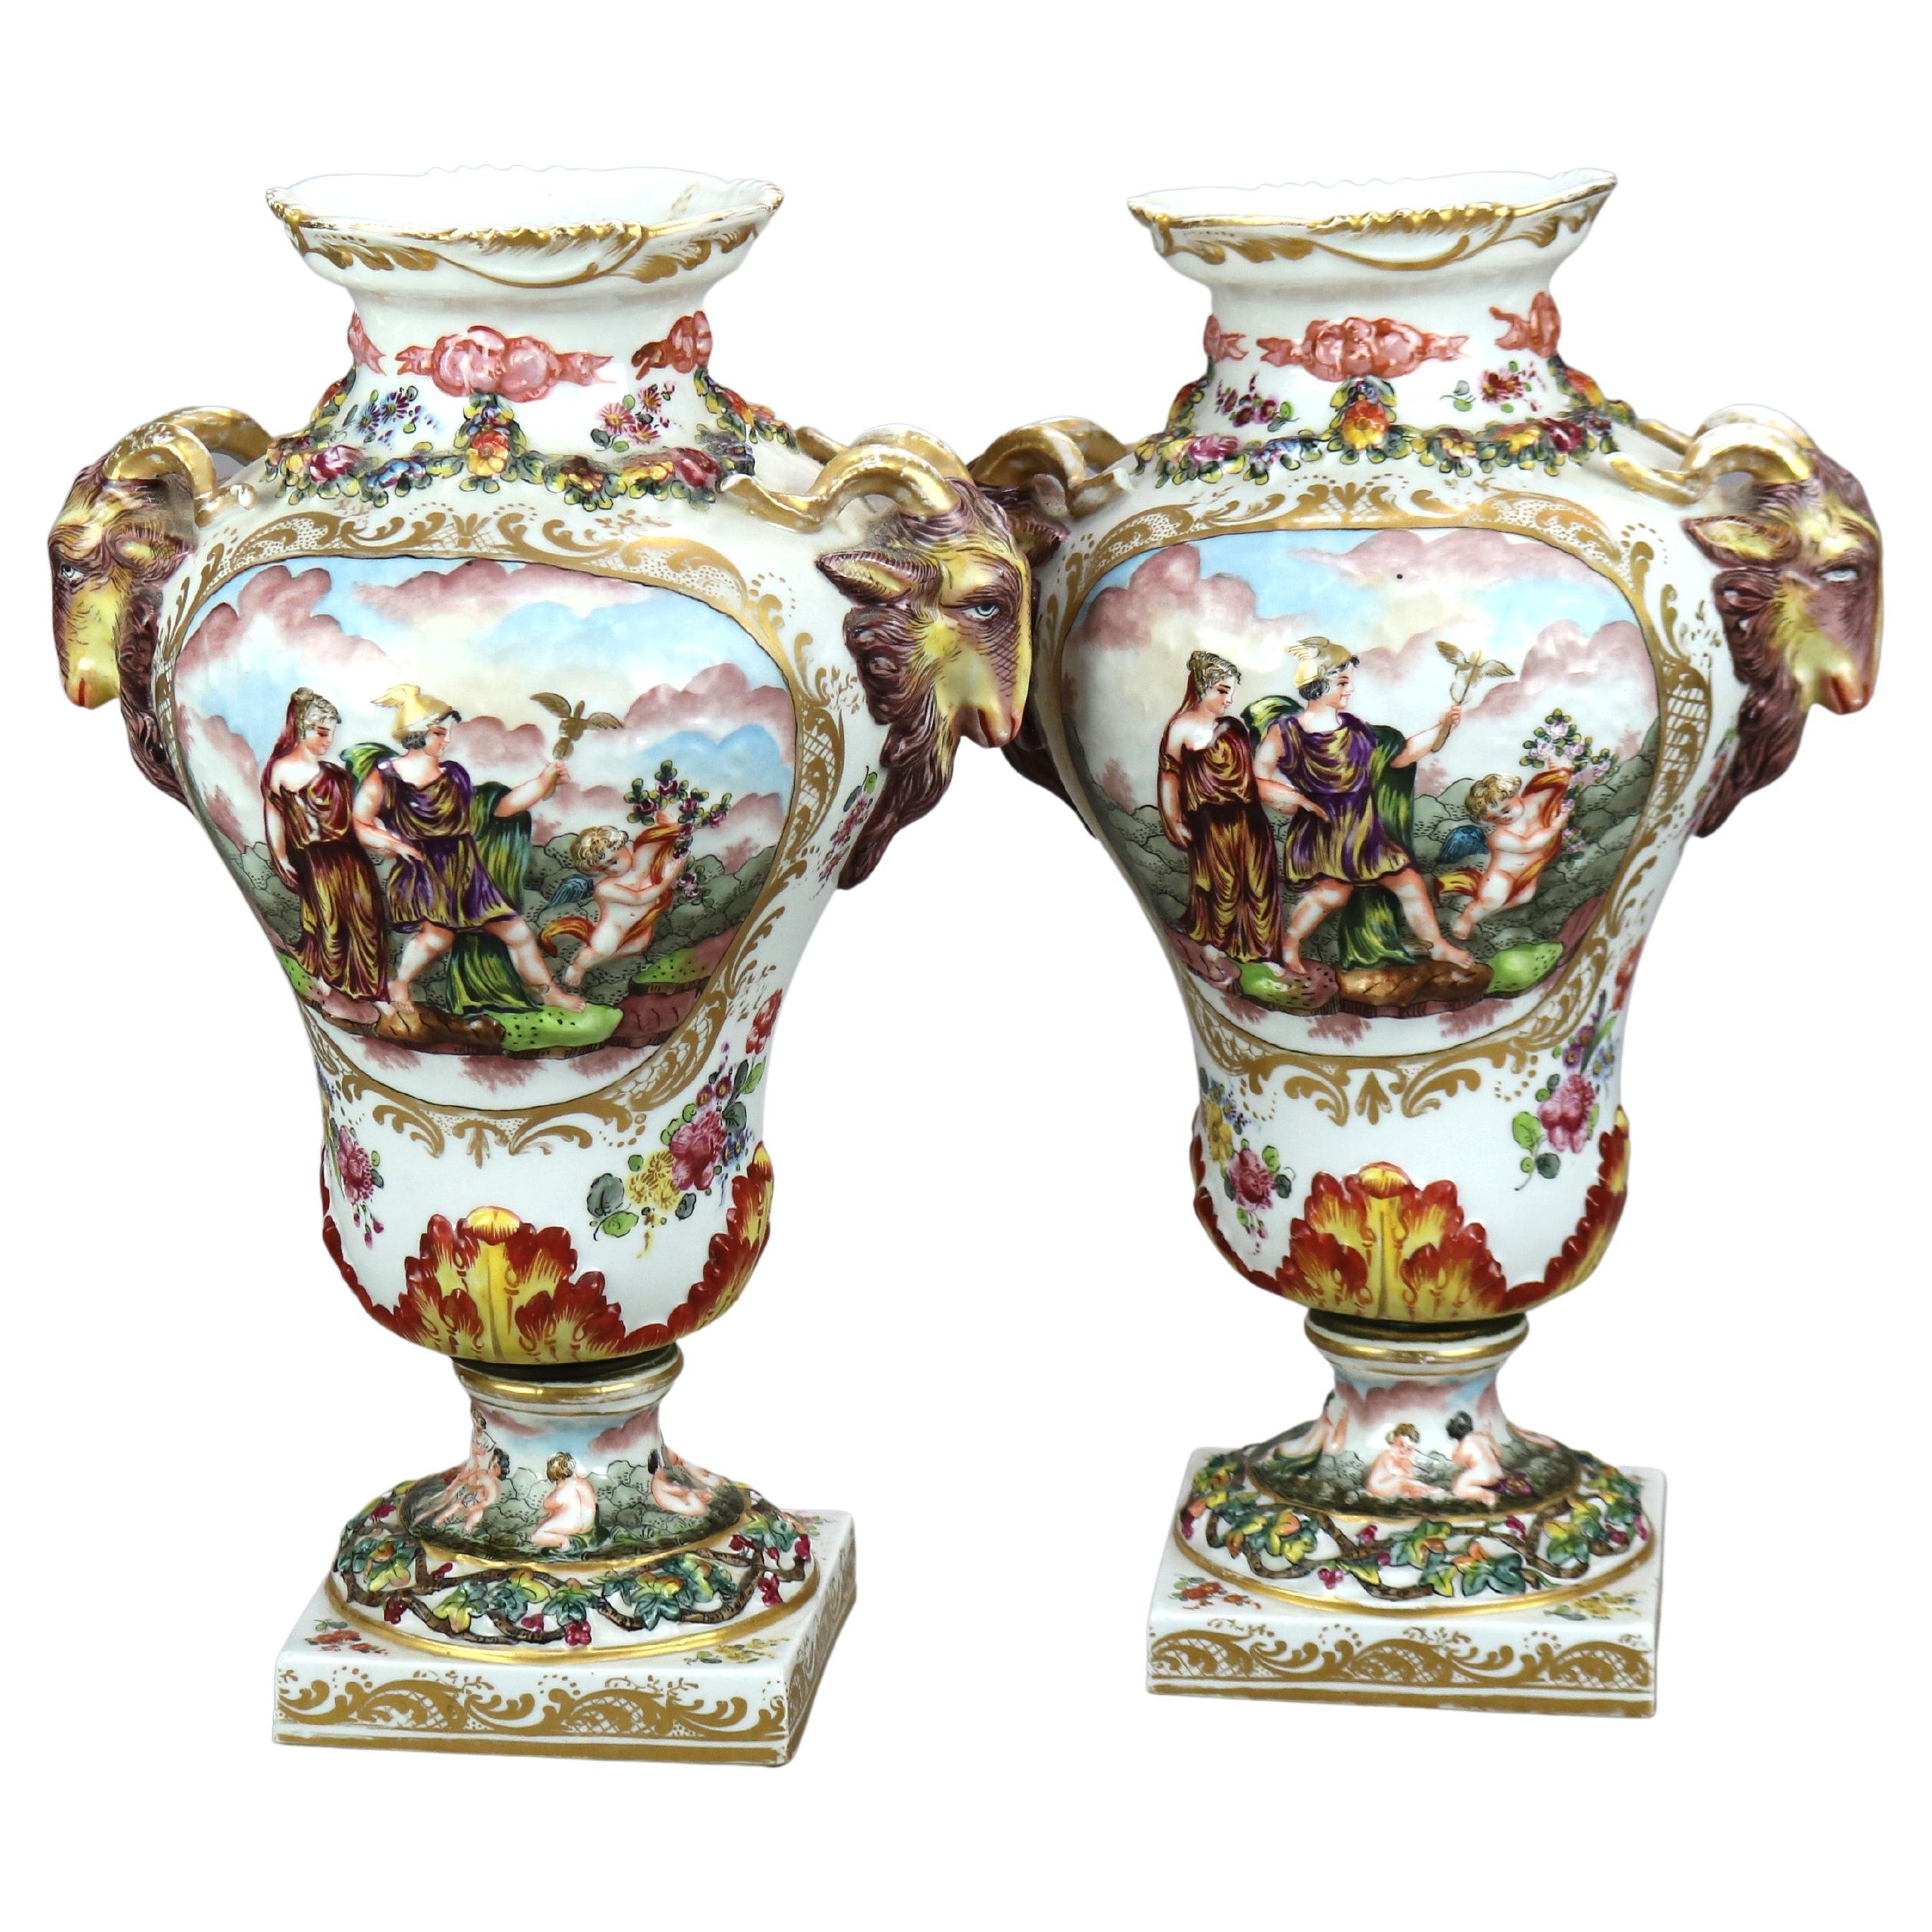 Antique Pair German Saxony Porcelain Urns with Classical Scenes in Relief, c1860